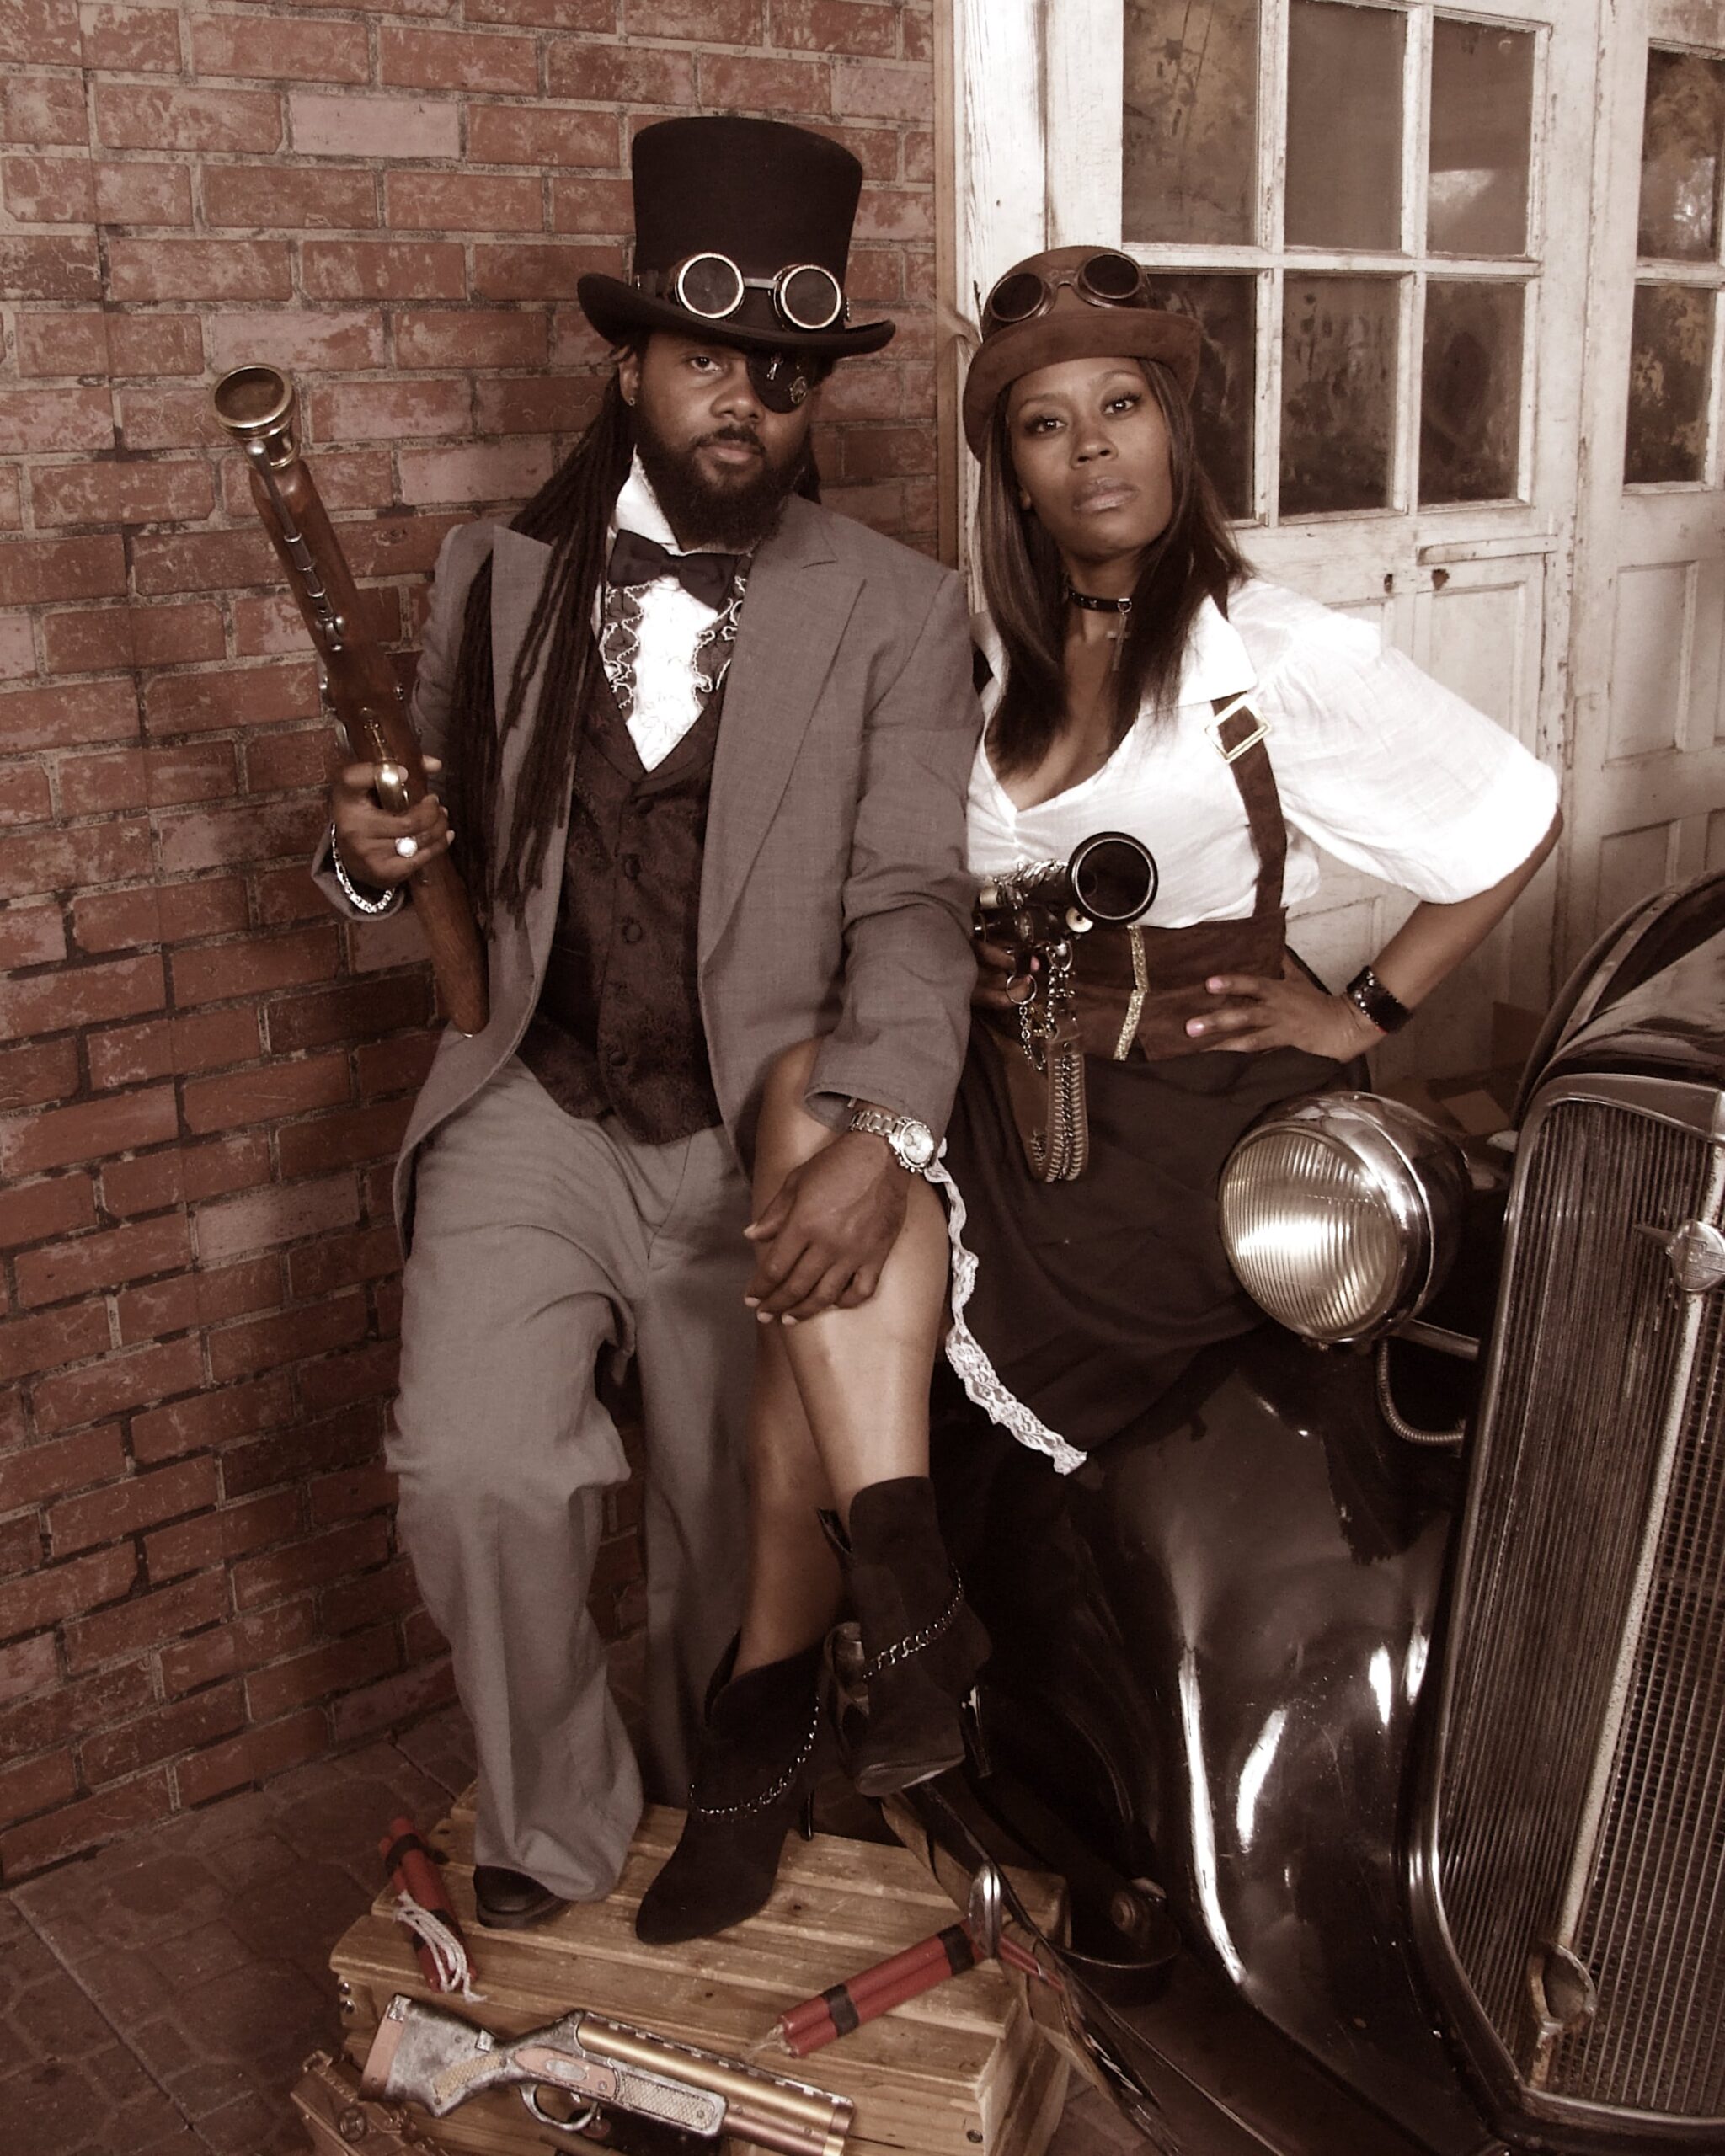 Two Couple in a Steampunk